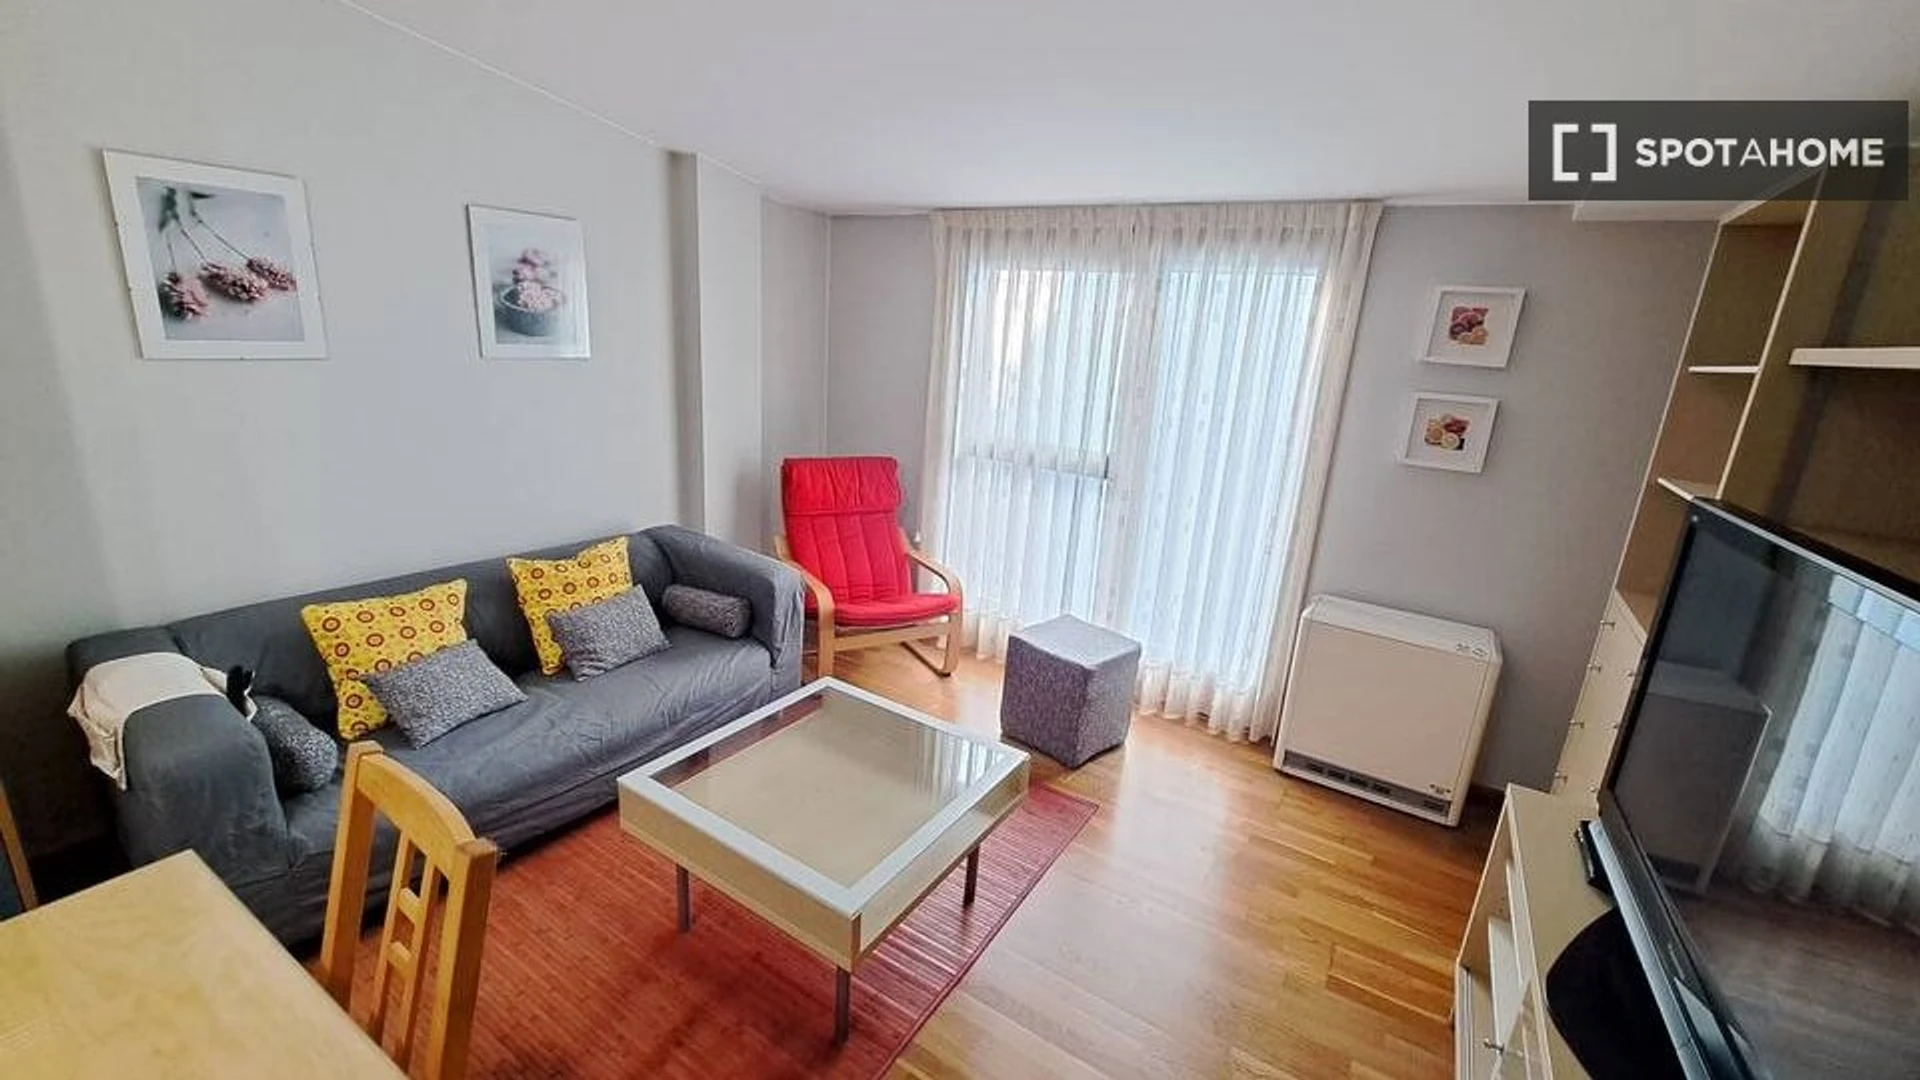 Accommodation with 3 bedrooms in Vigo